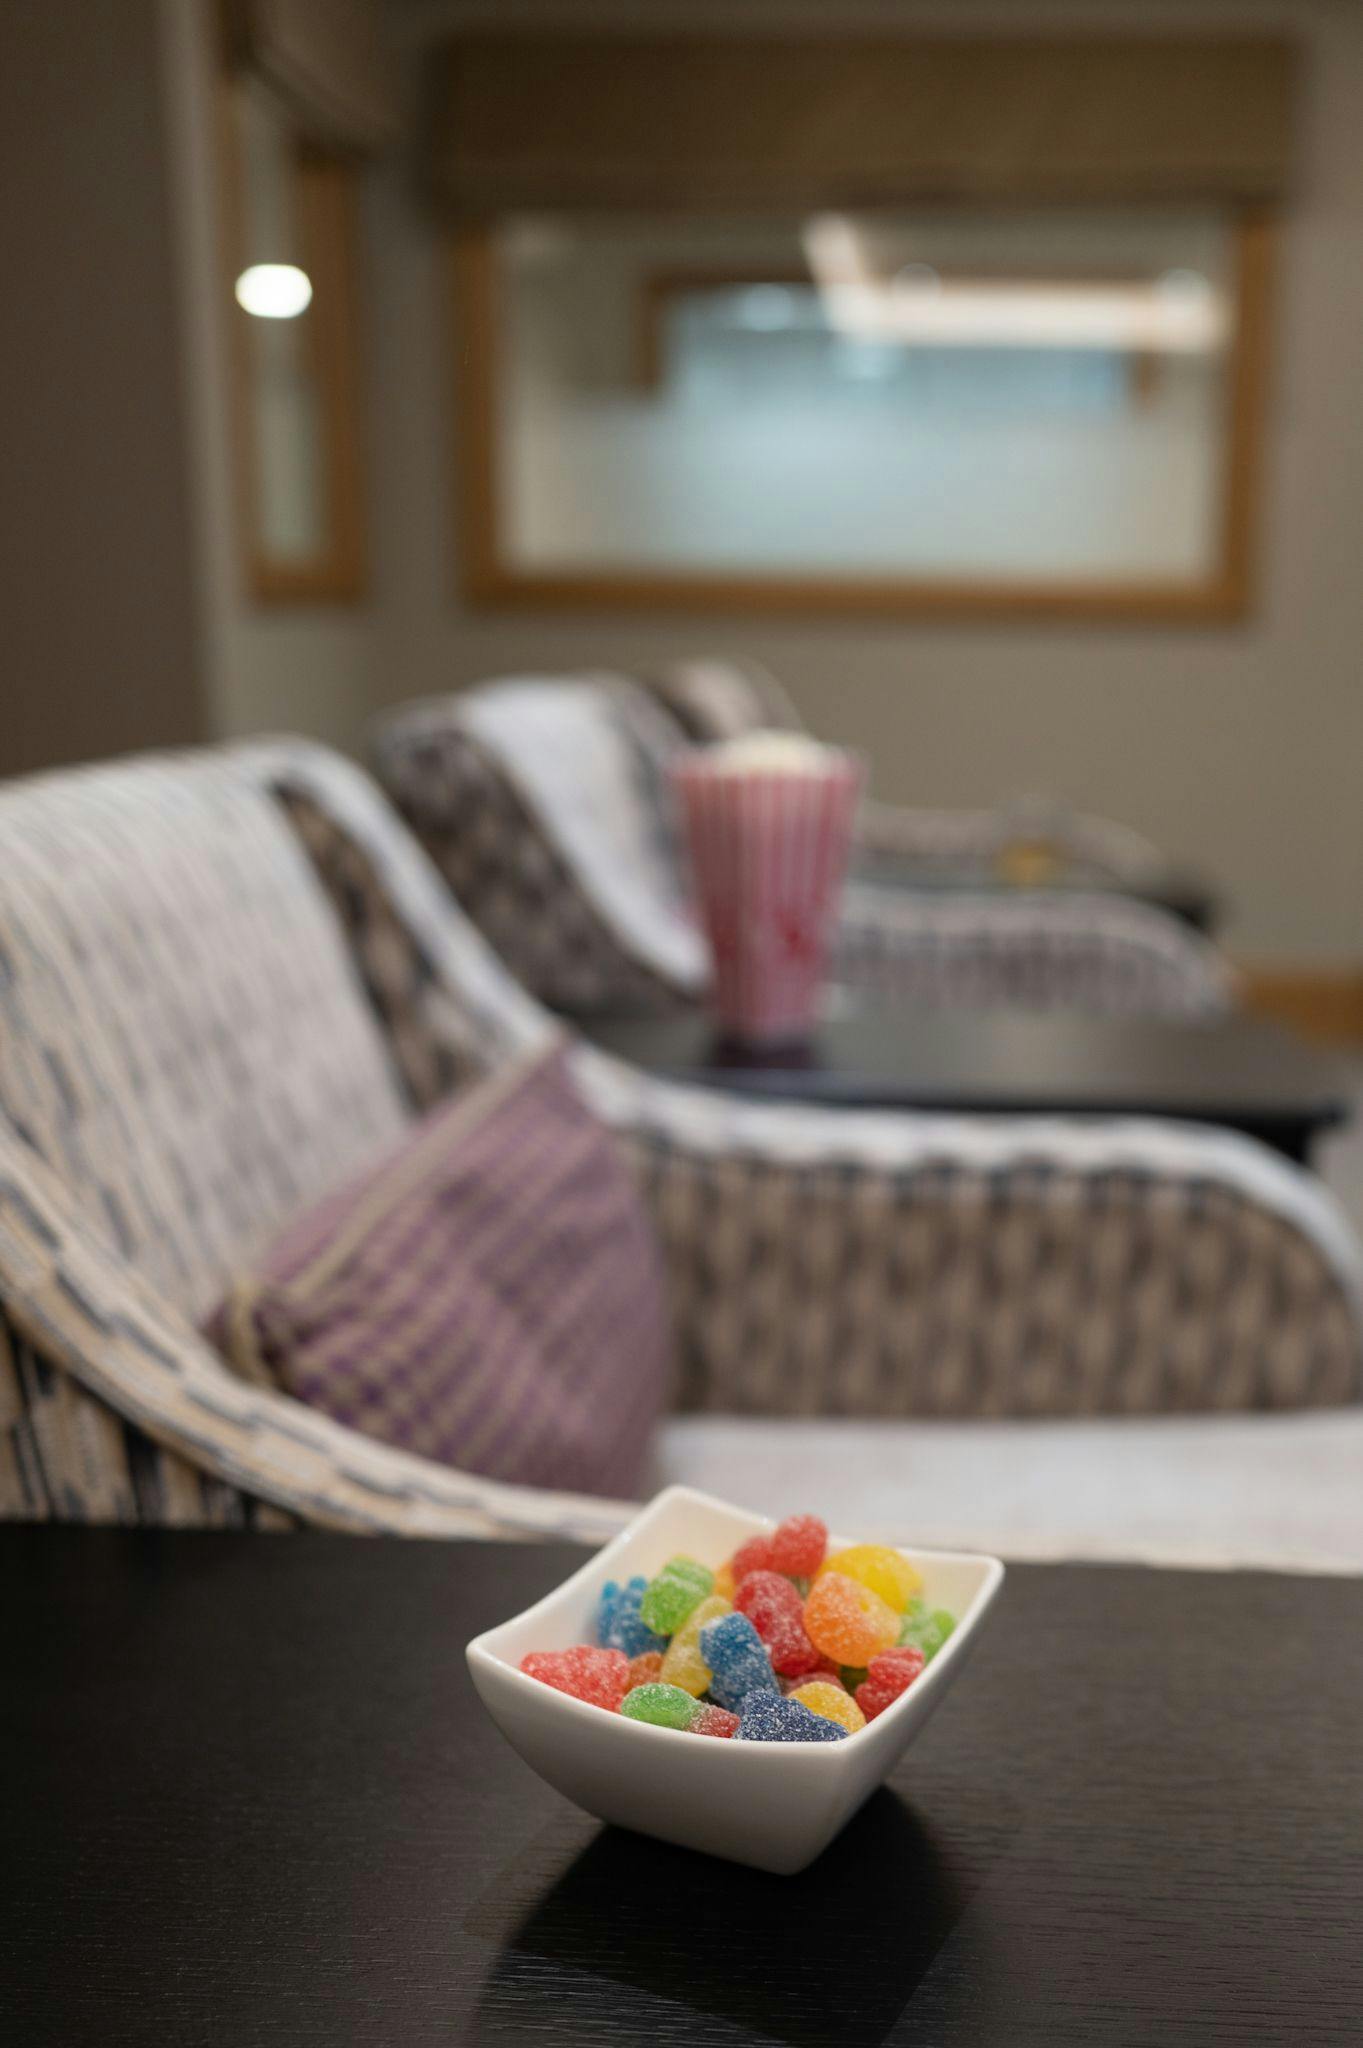 Bowl of Sweets in Cinema Room